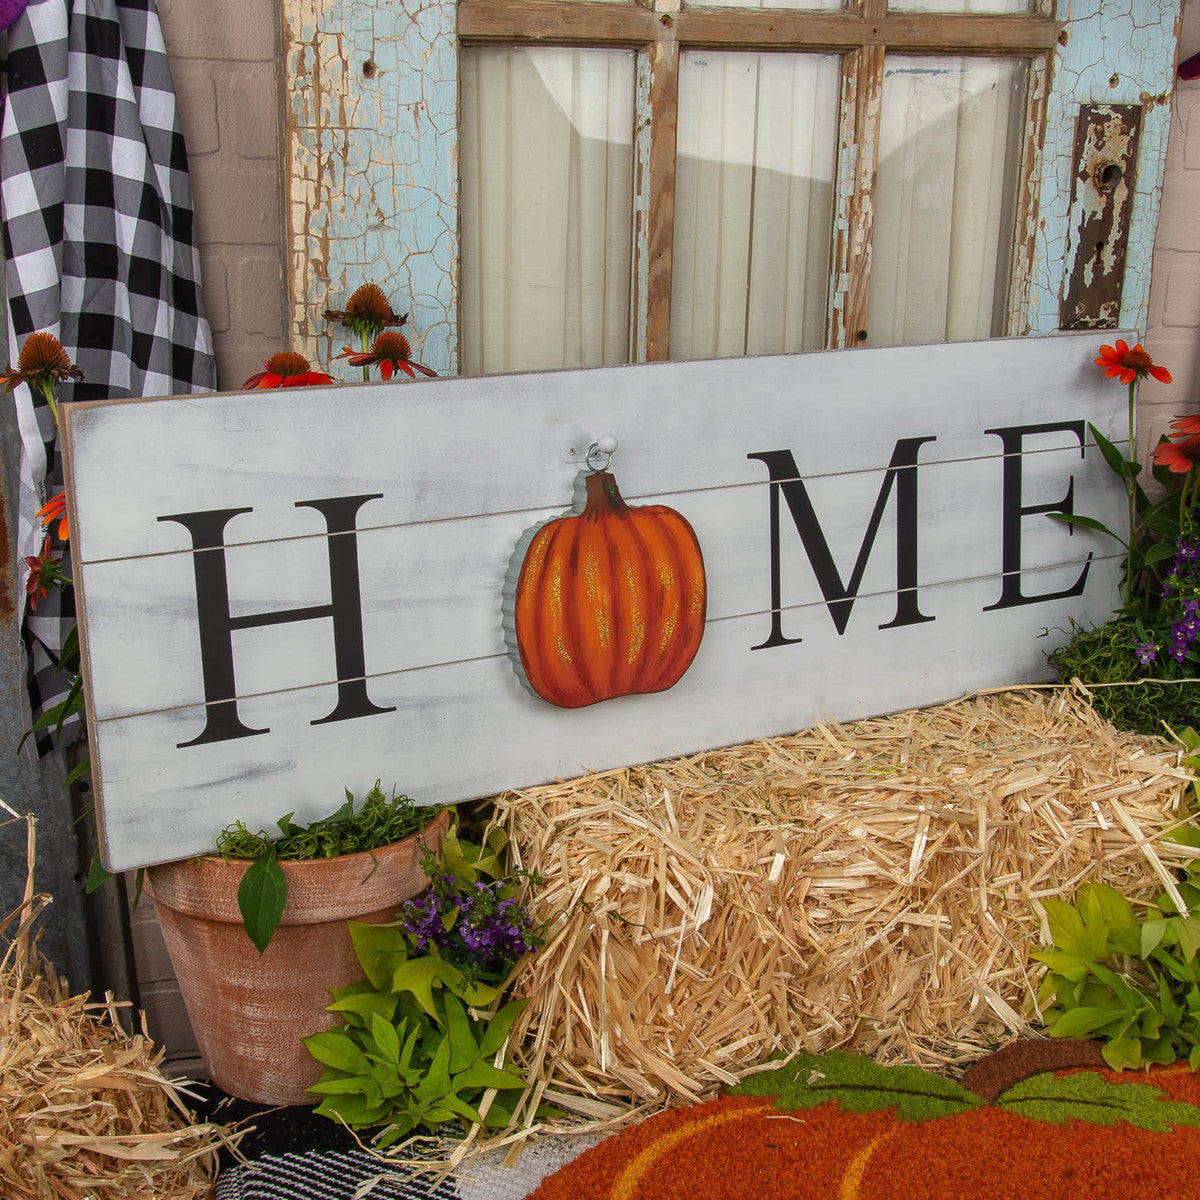 White mini gallery "Home" display board with pumpkin hanging on it